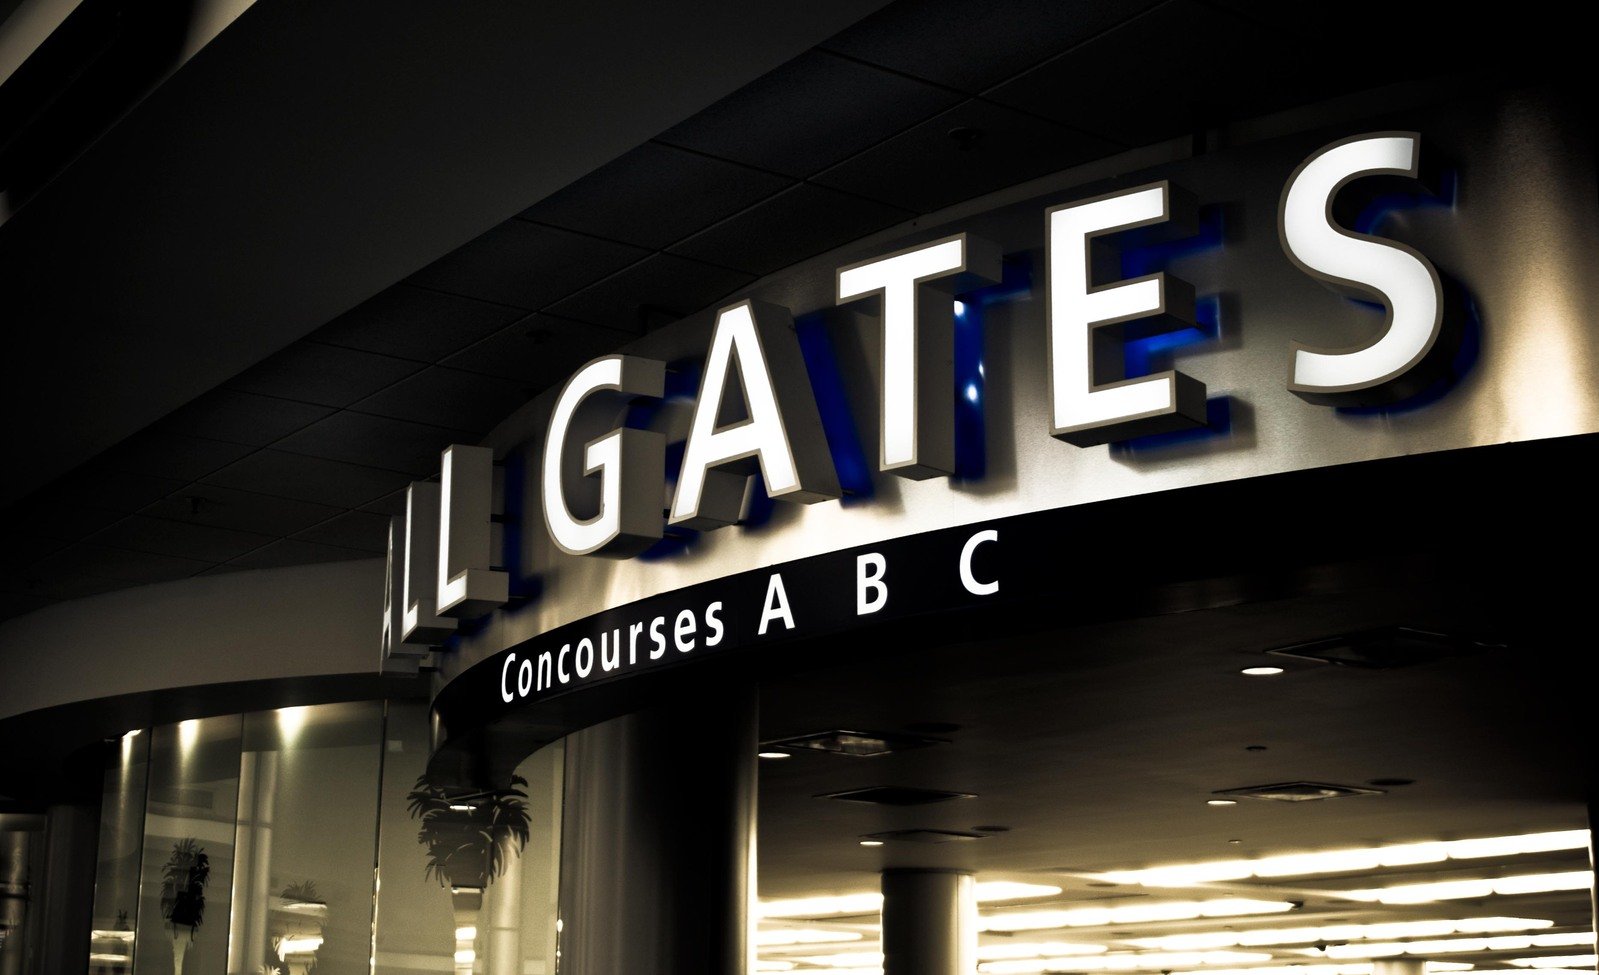 the entrance to gates business and abc at night